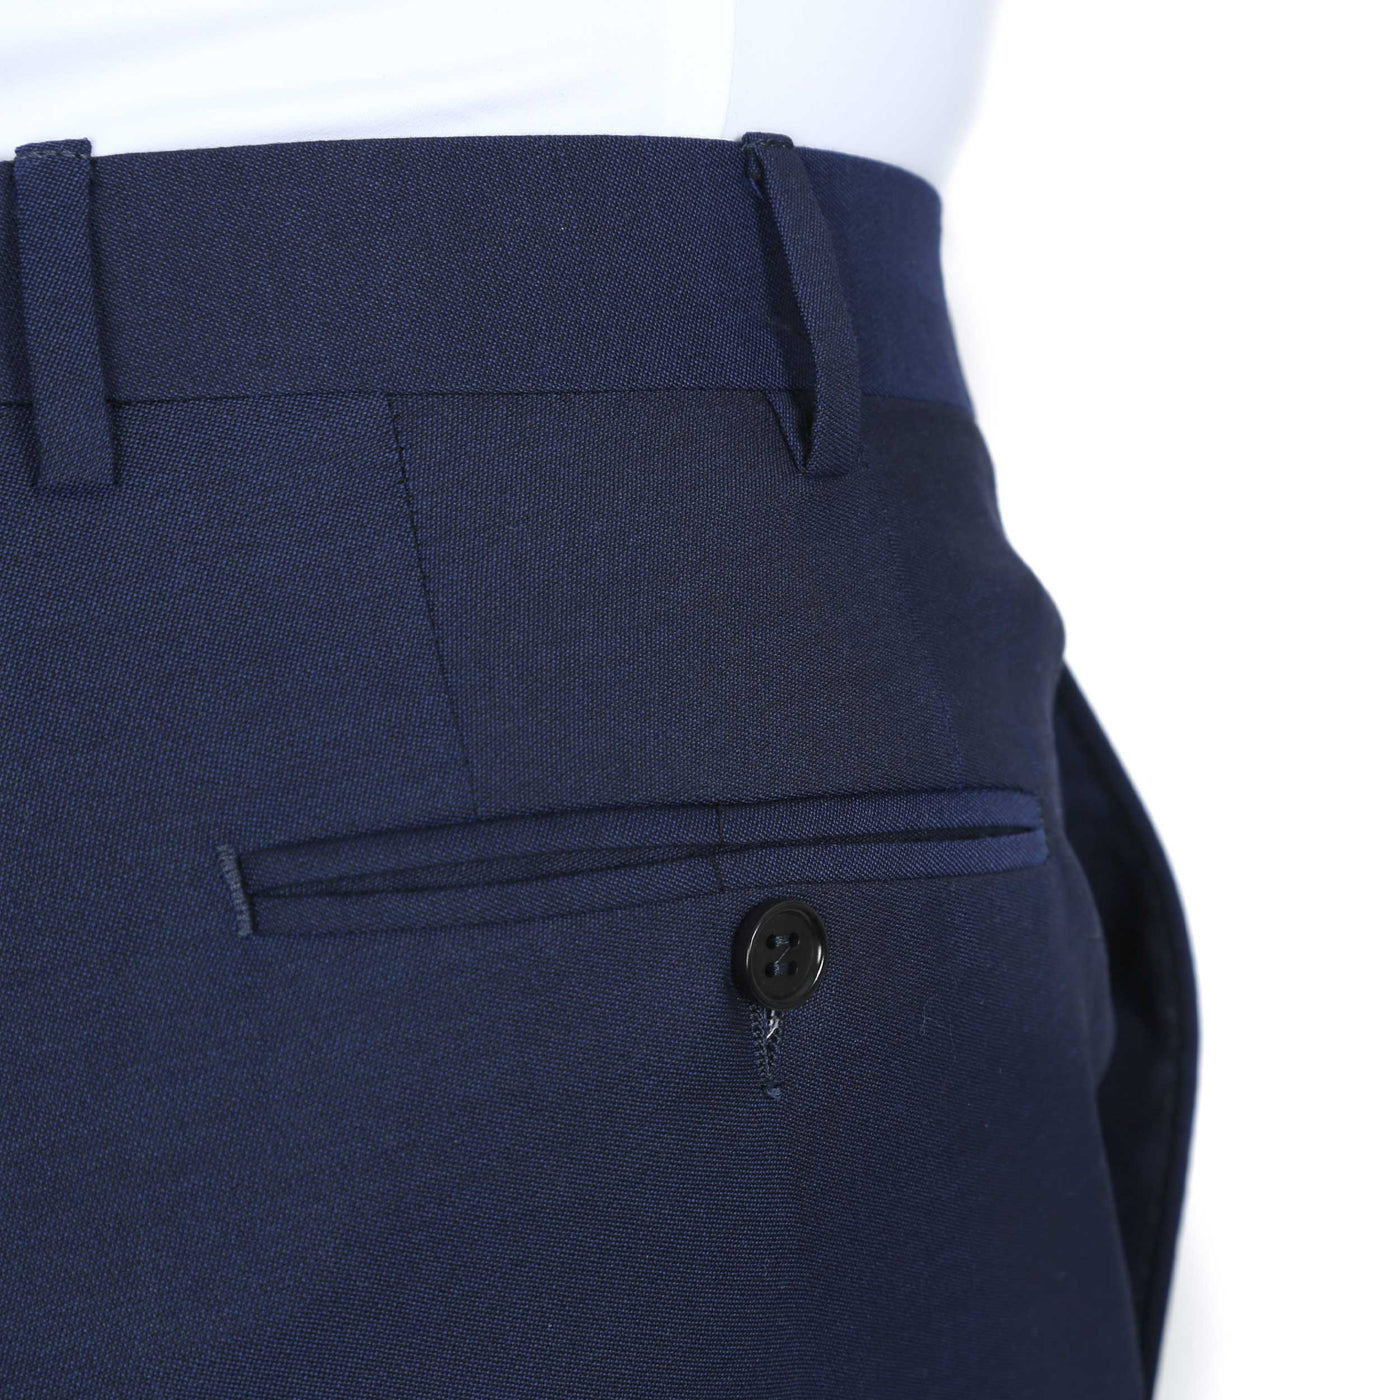 Canali Classic Trouser in Navy Seat Pocket